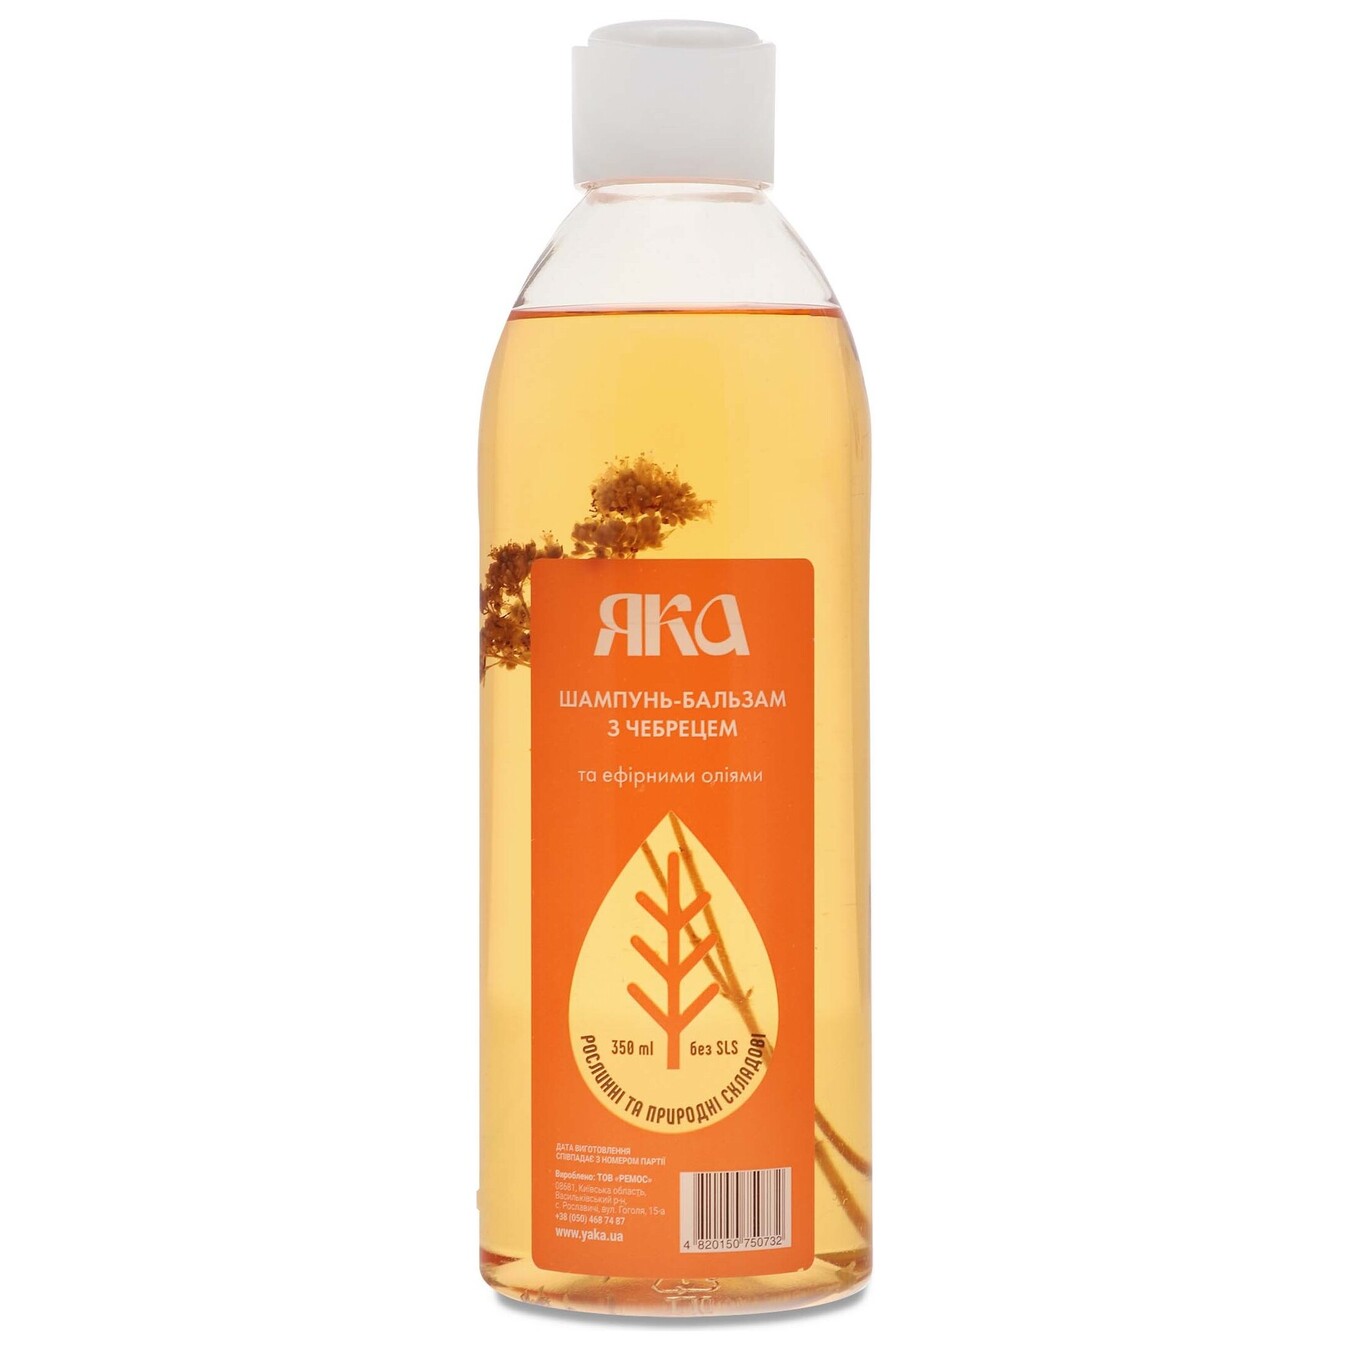 YAKA shampoo-balm for daily use with thyme and essential oils 350 ml